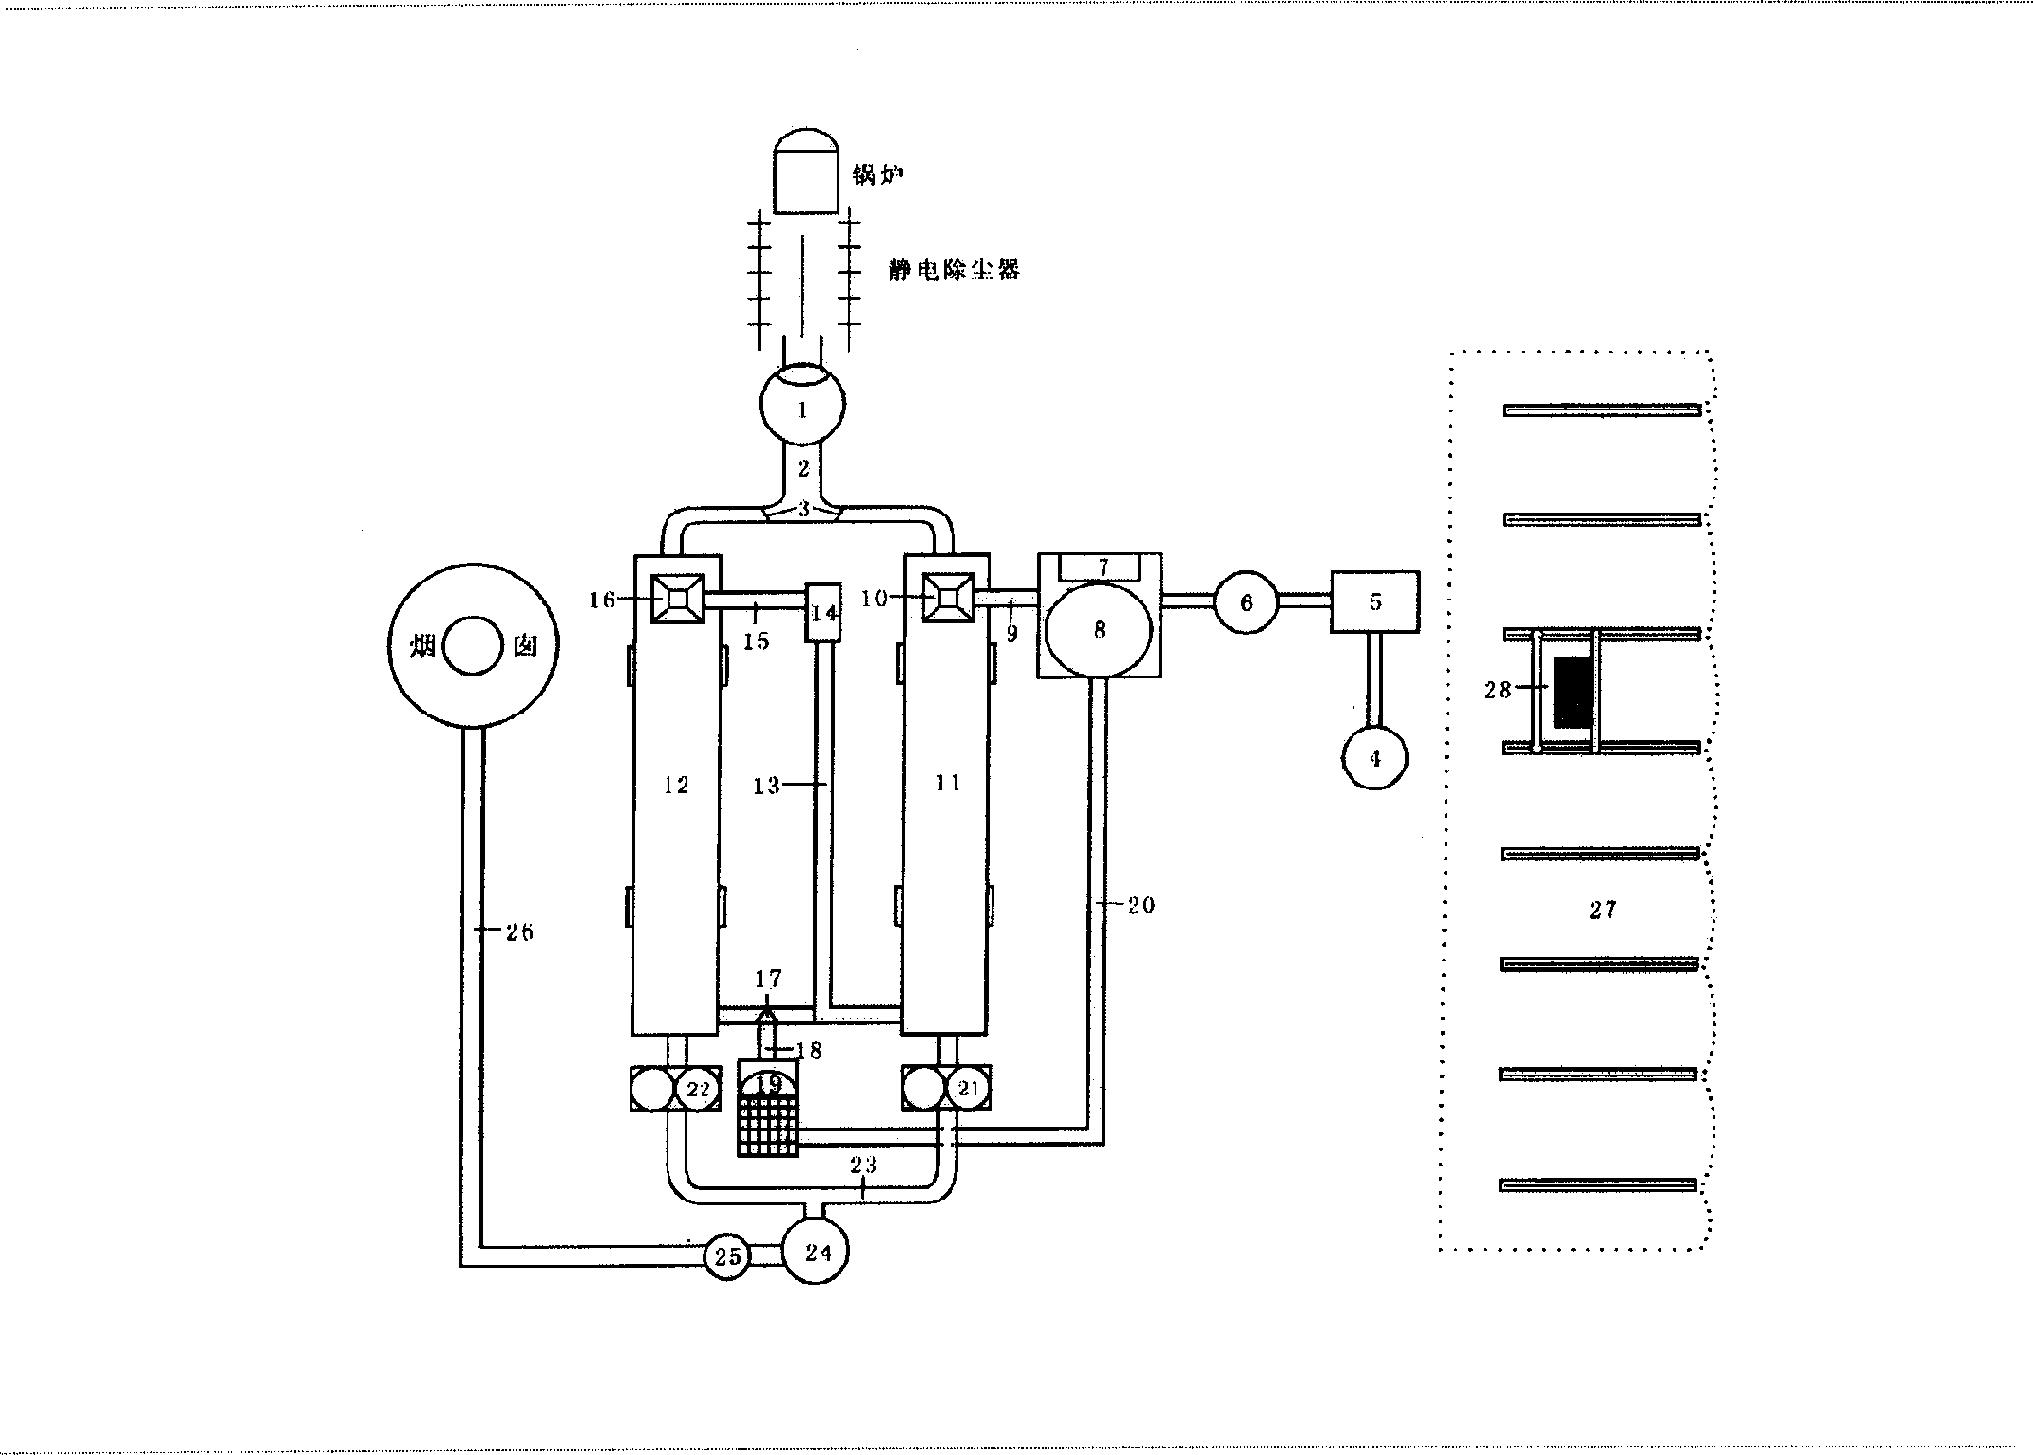 Anhydration system for sludge by using remaining heat of flue gas from steam power plant